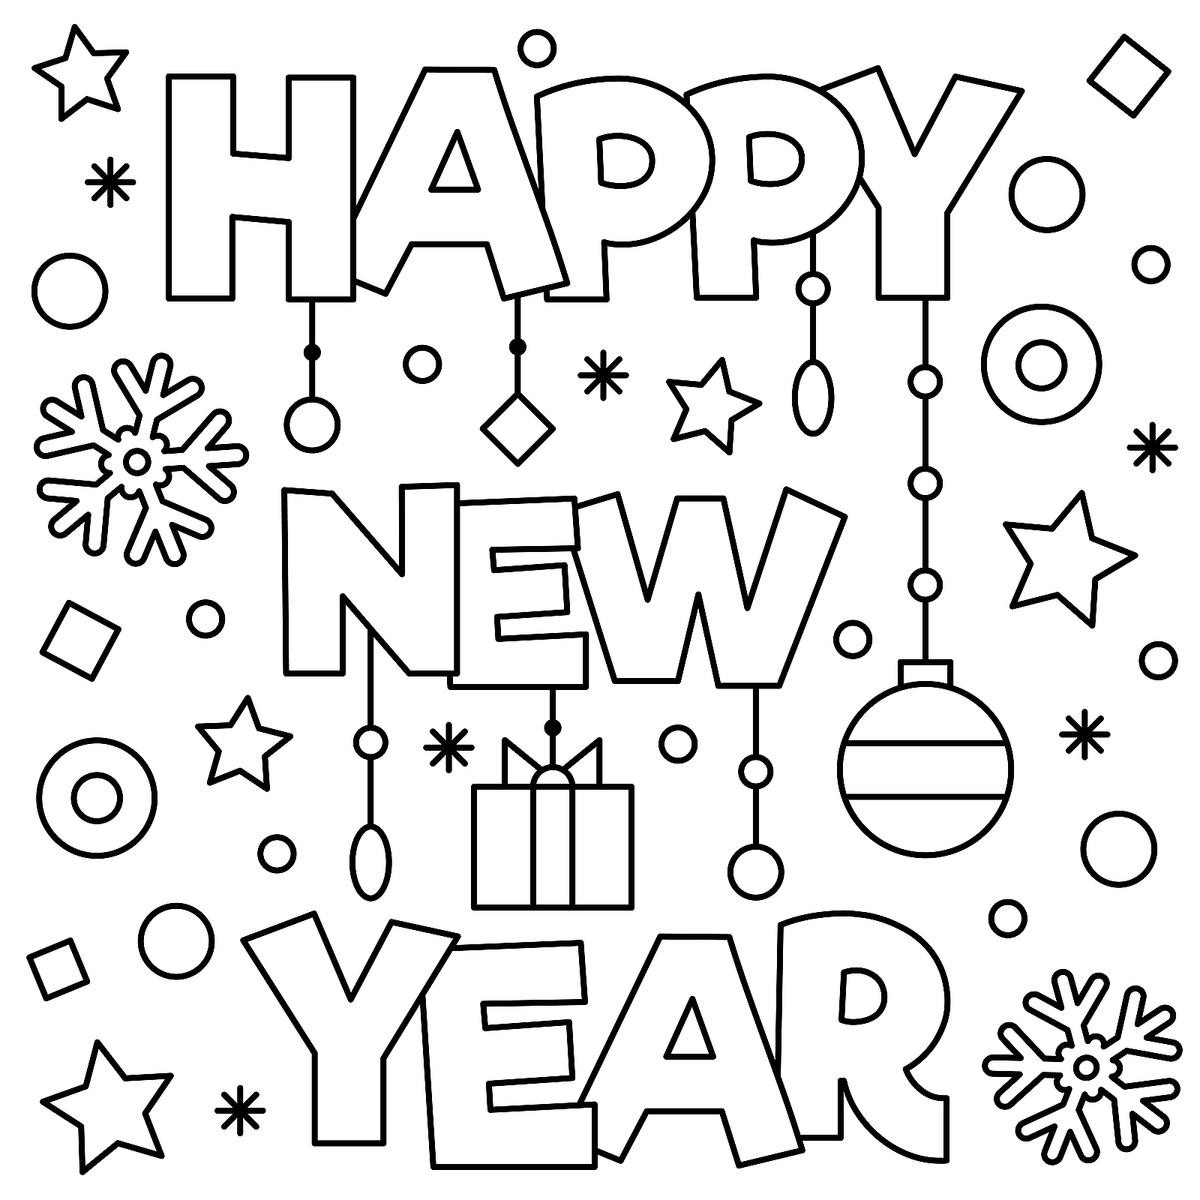 Printable New Years Coloring Pages
 New Year & January Coloring Pages Printable Fun to Help